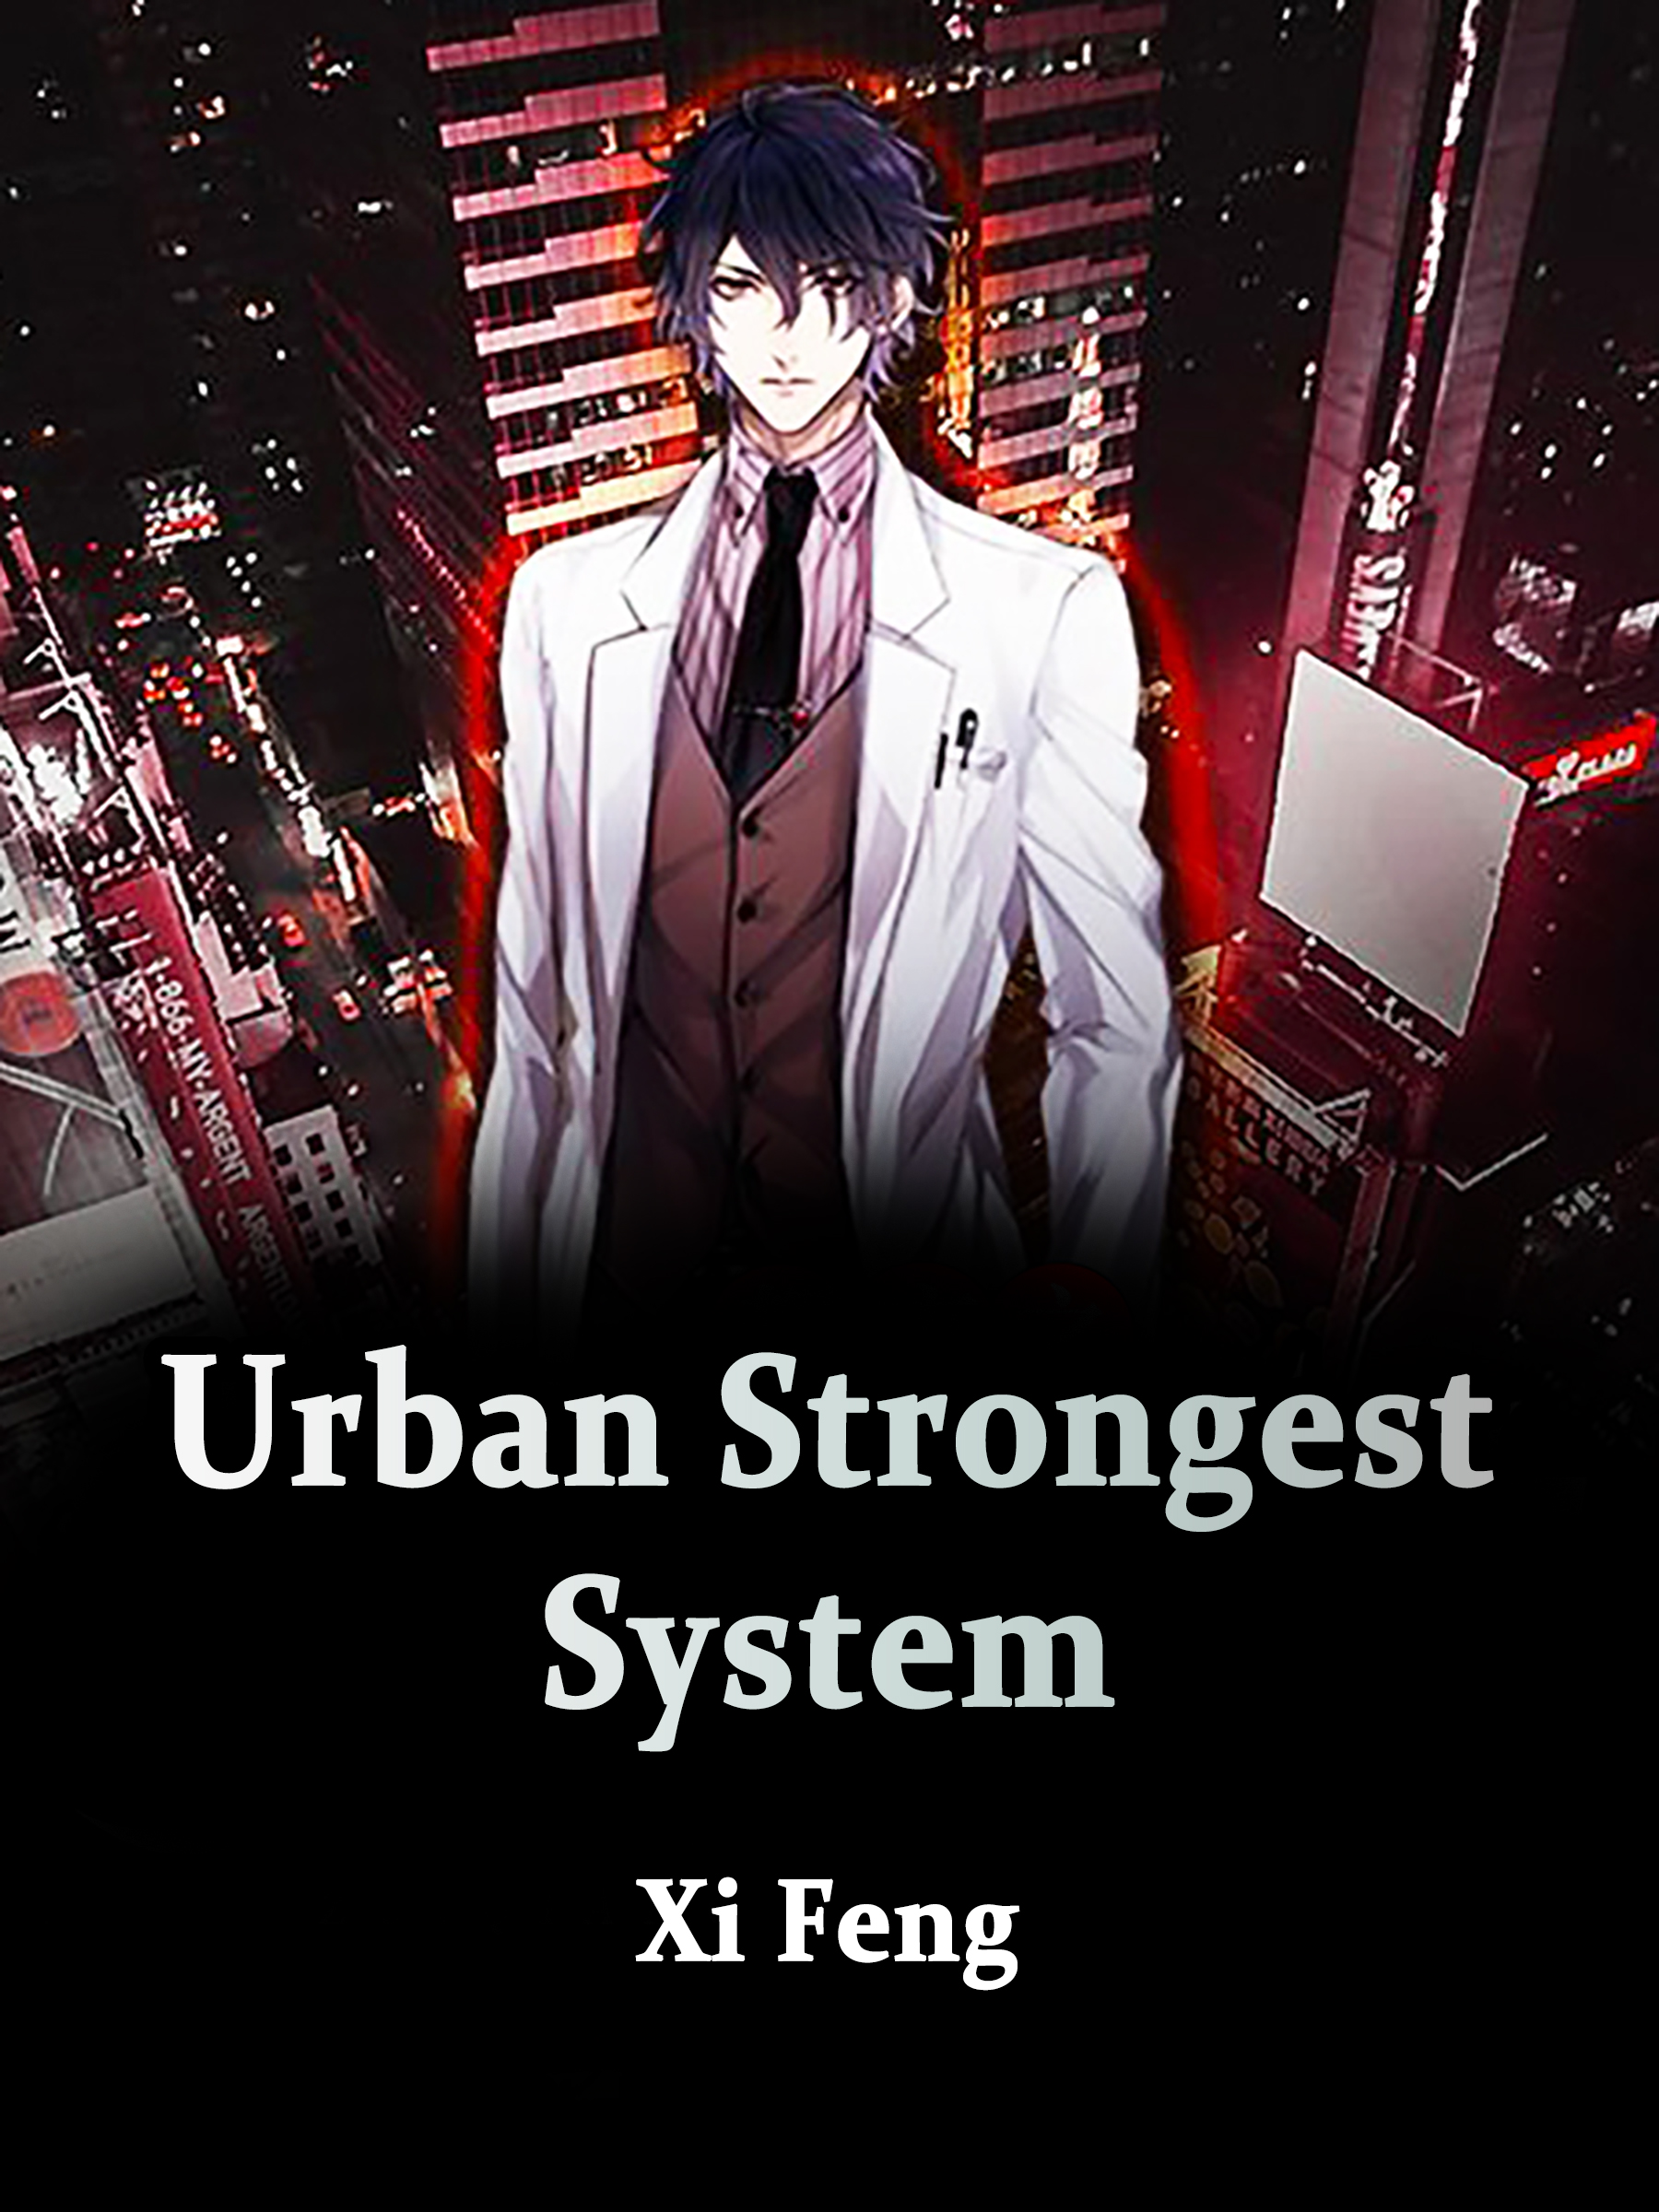 The strongest system